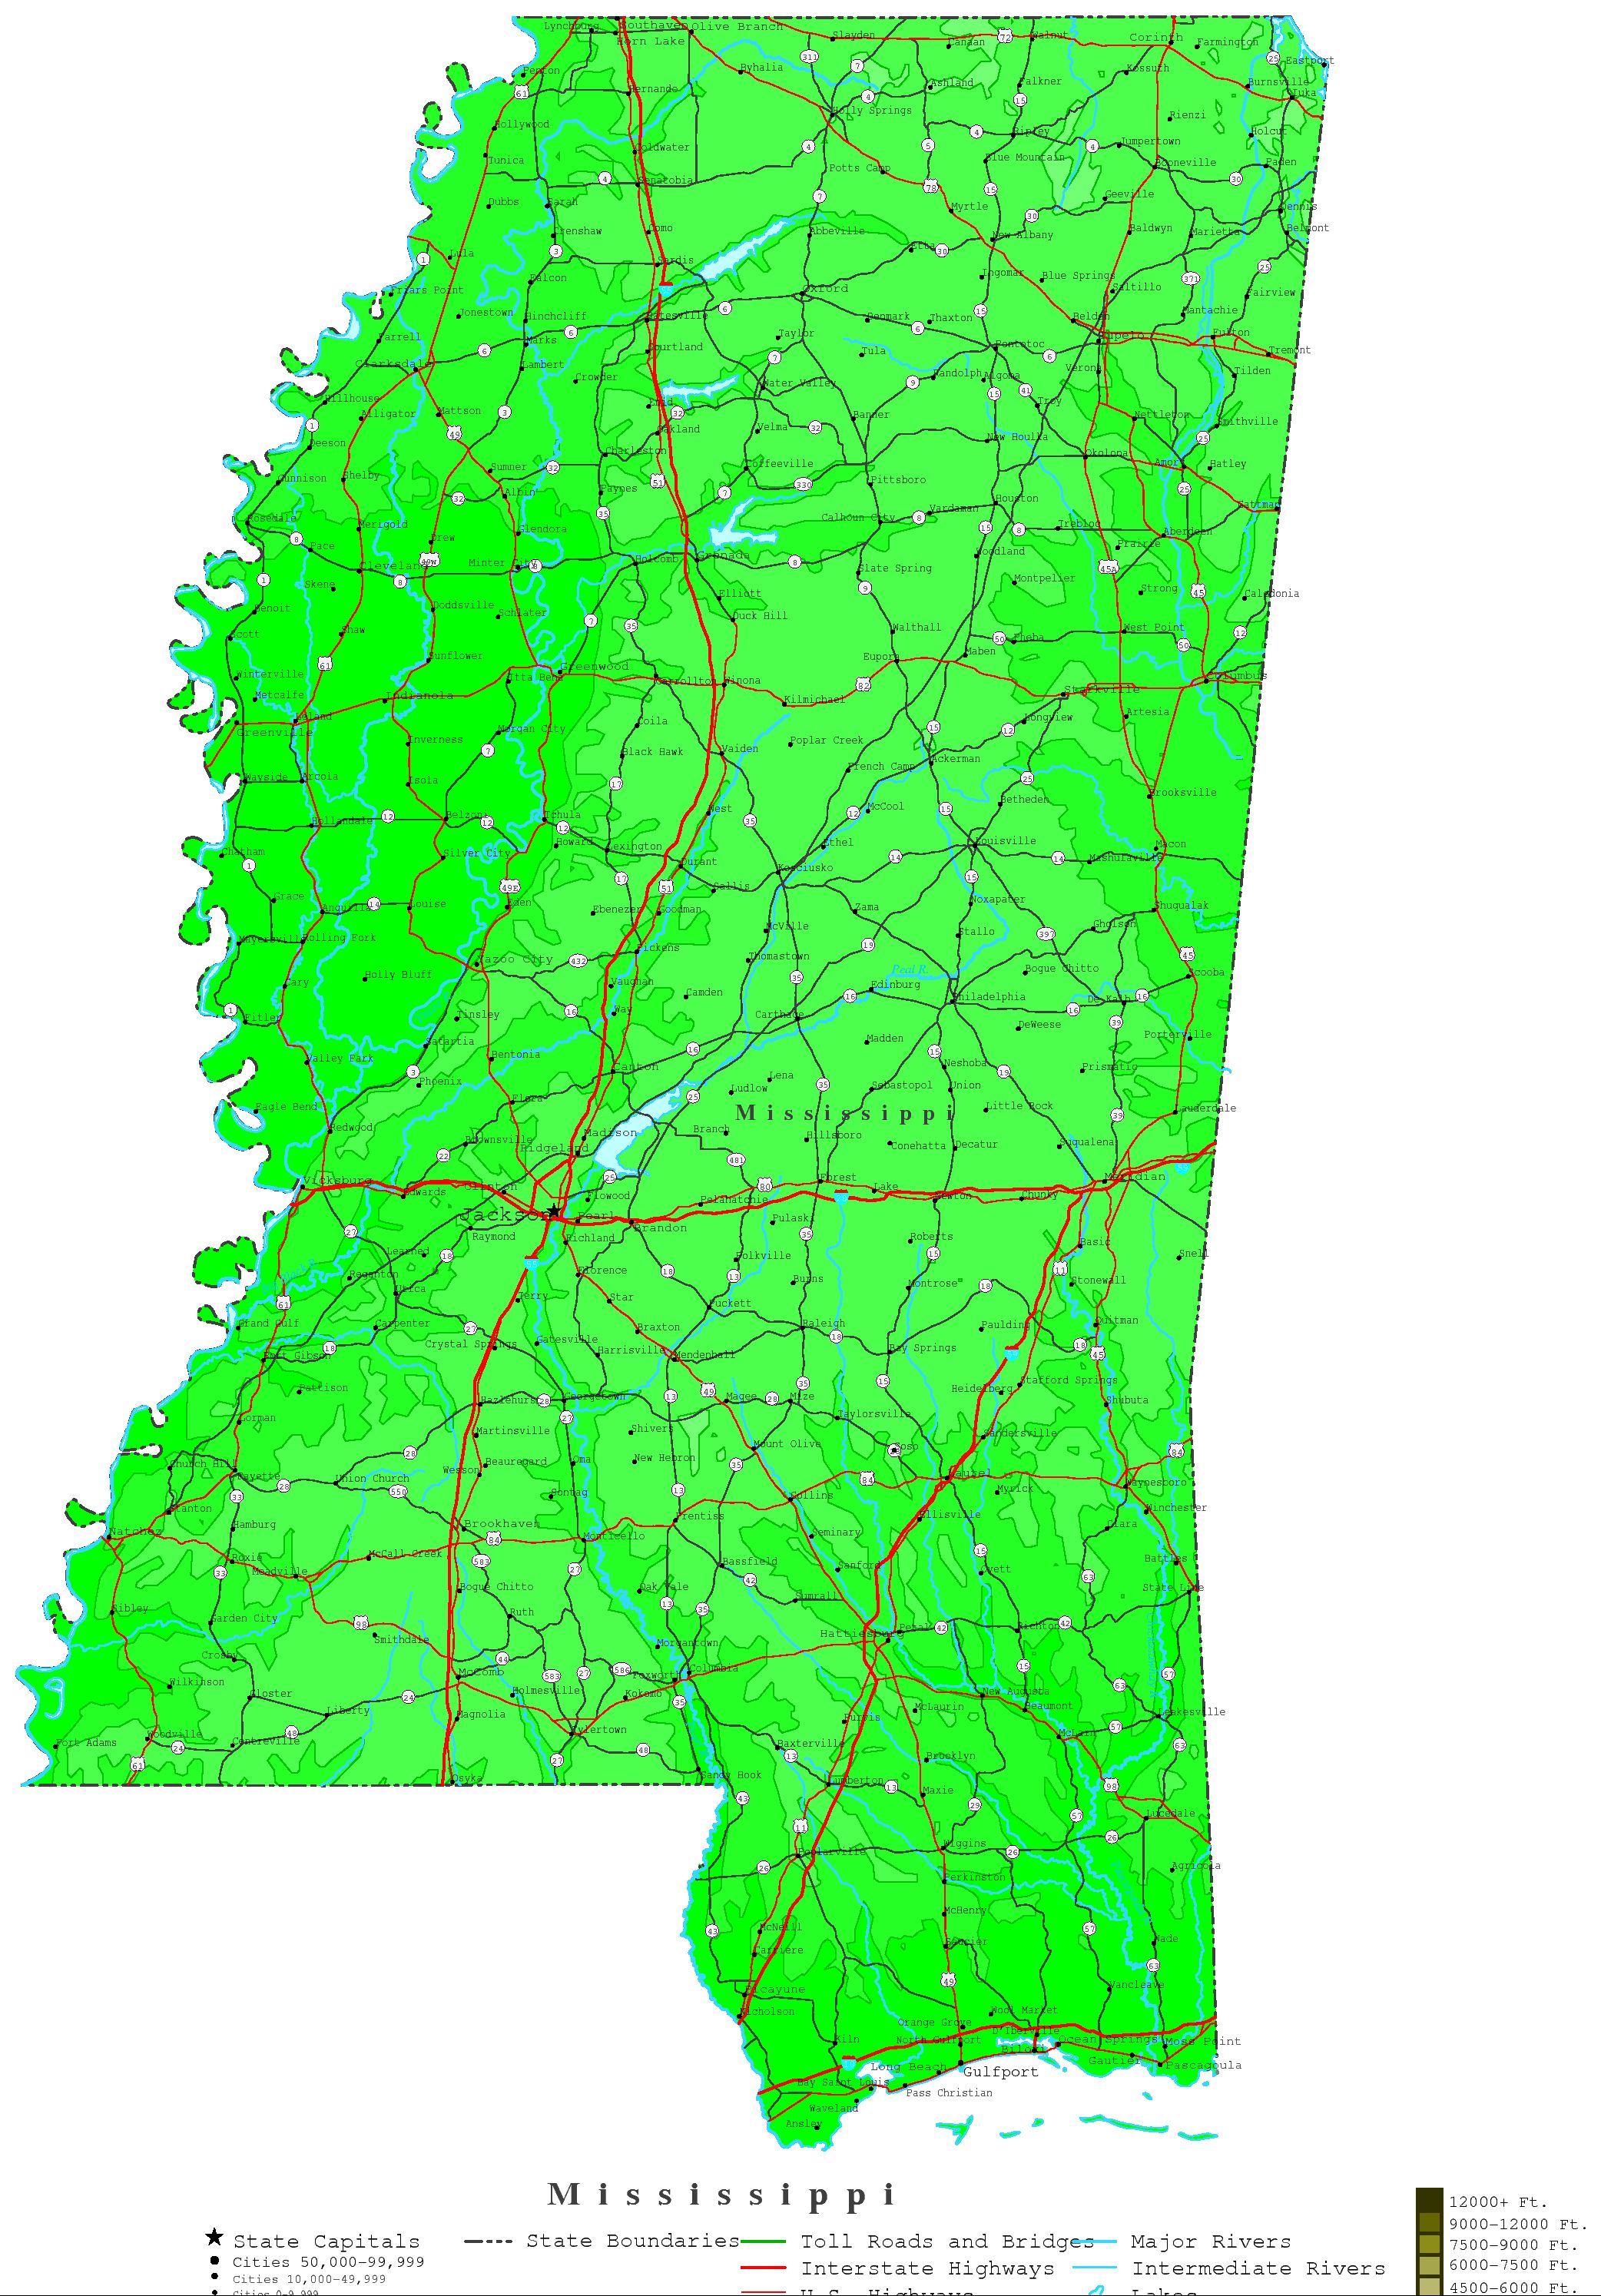 Mississippi USGS topo maps. Click here! contour map of Mississippi state,